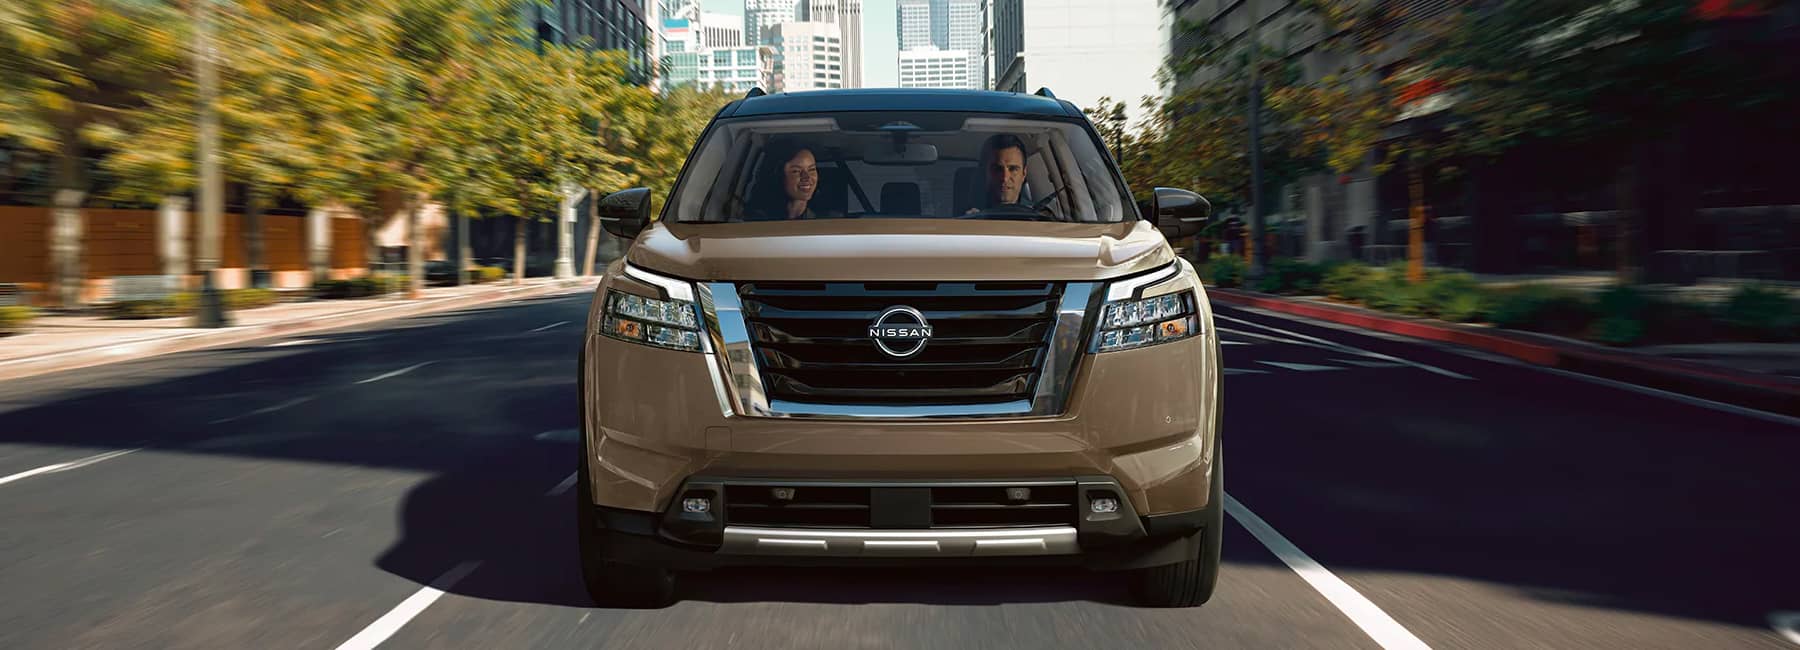 2023 Nissan Pathfinder on street rugged front grille